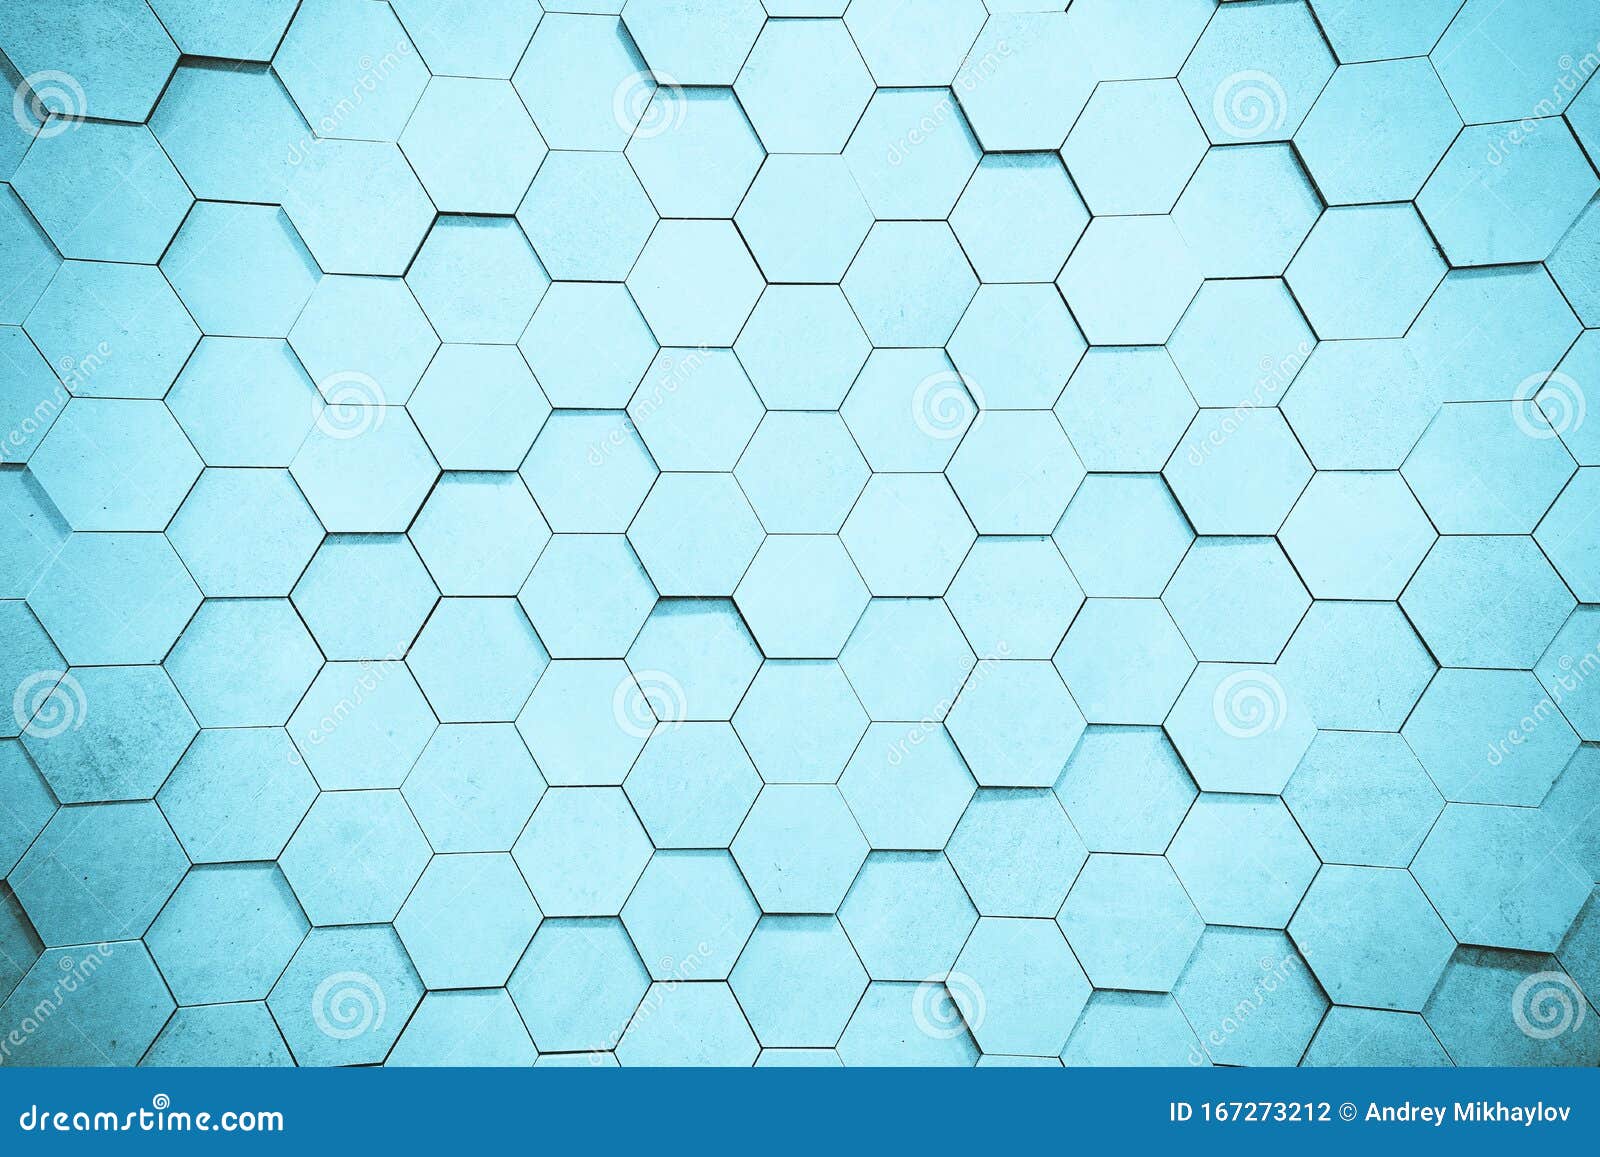 geometric hexagons. abstract silver metal background. toning